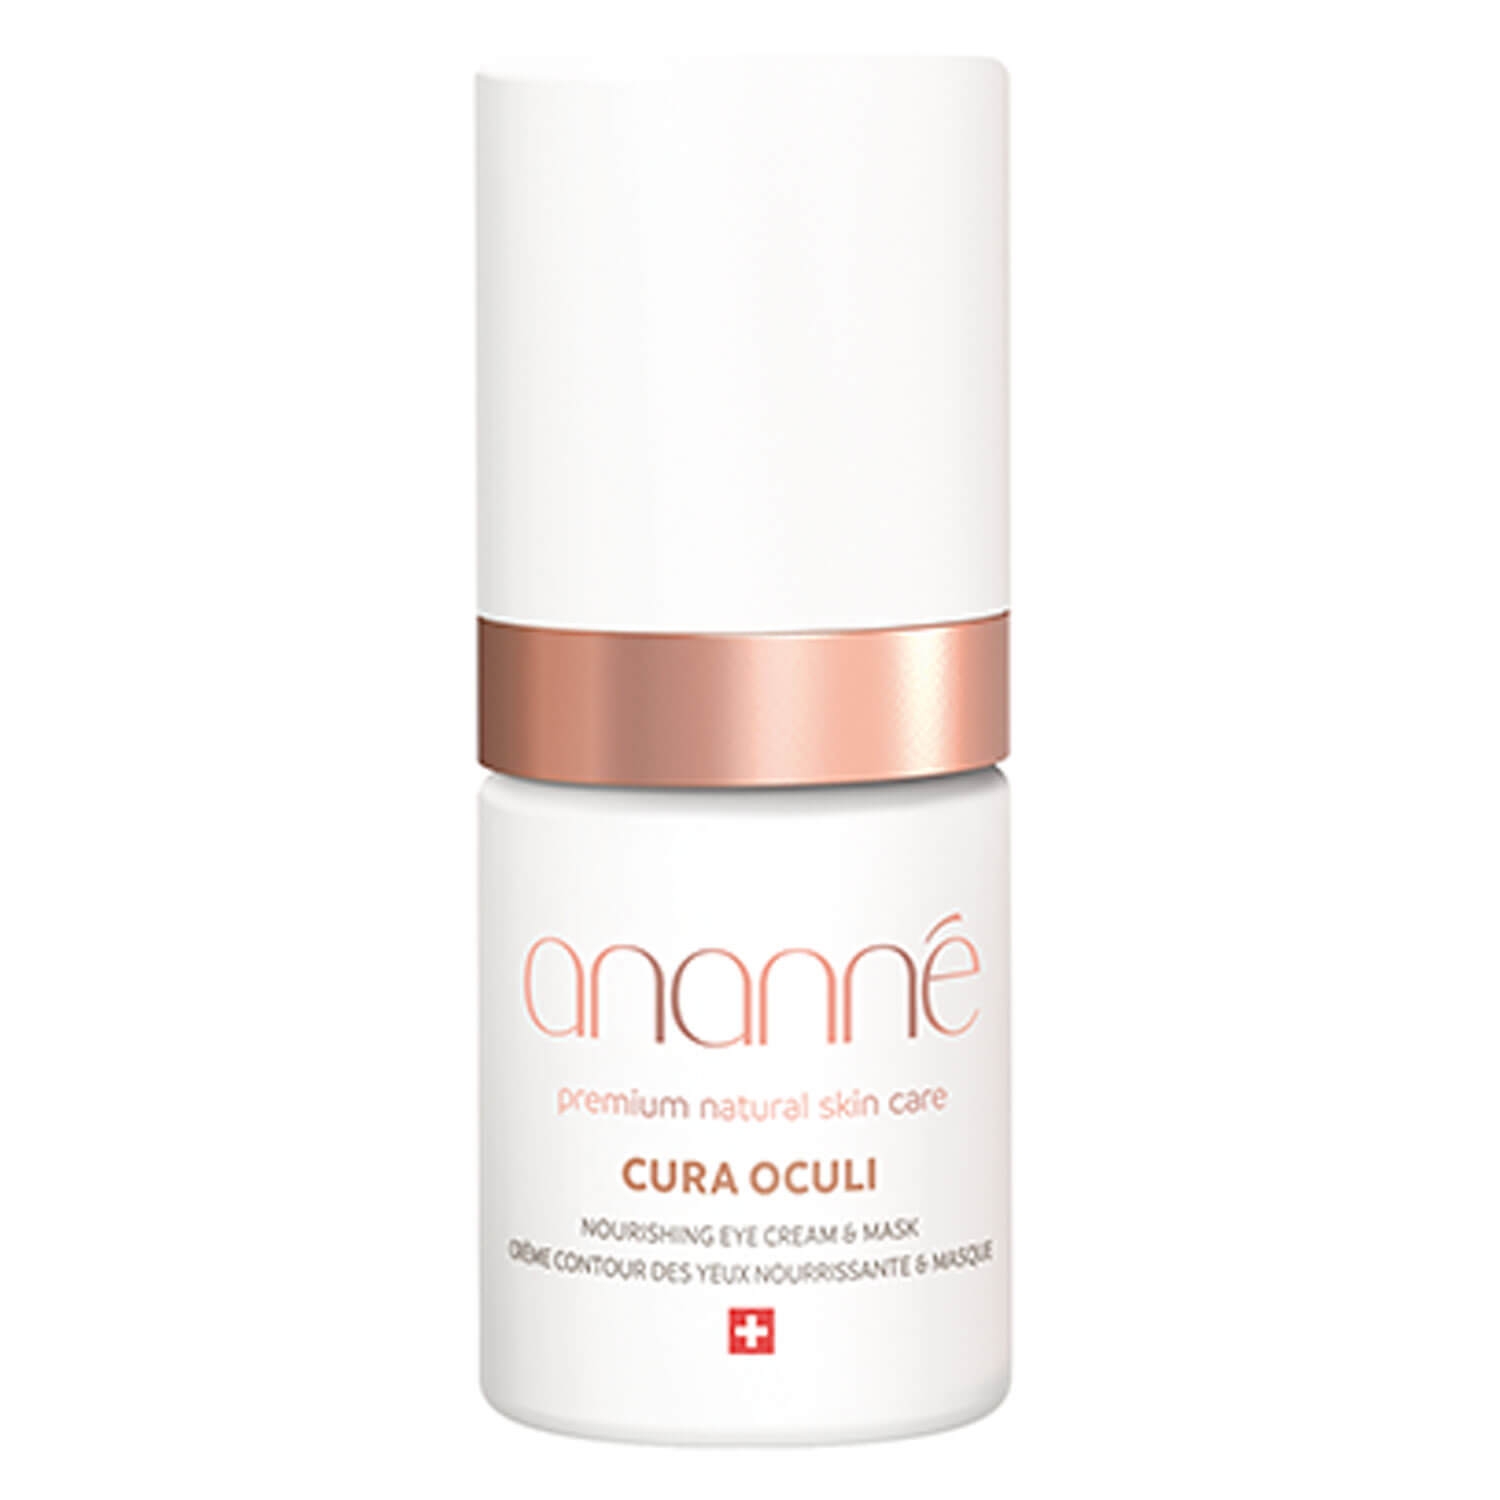 Product image from Ananné - Cura Oculi Nourishing Eye Cream & Mask